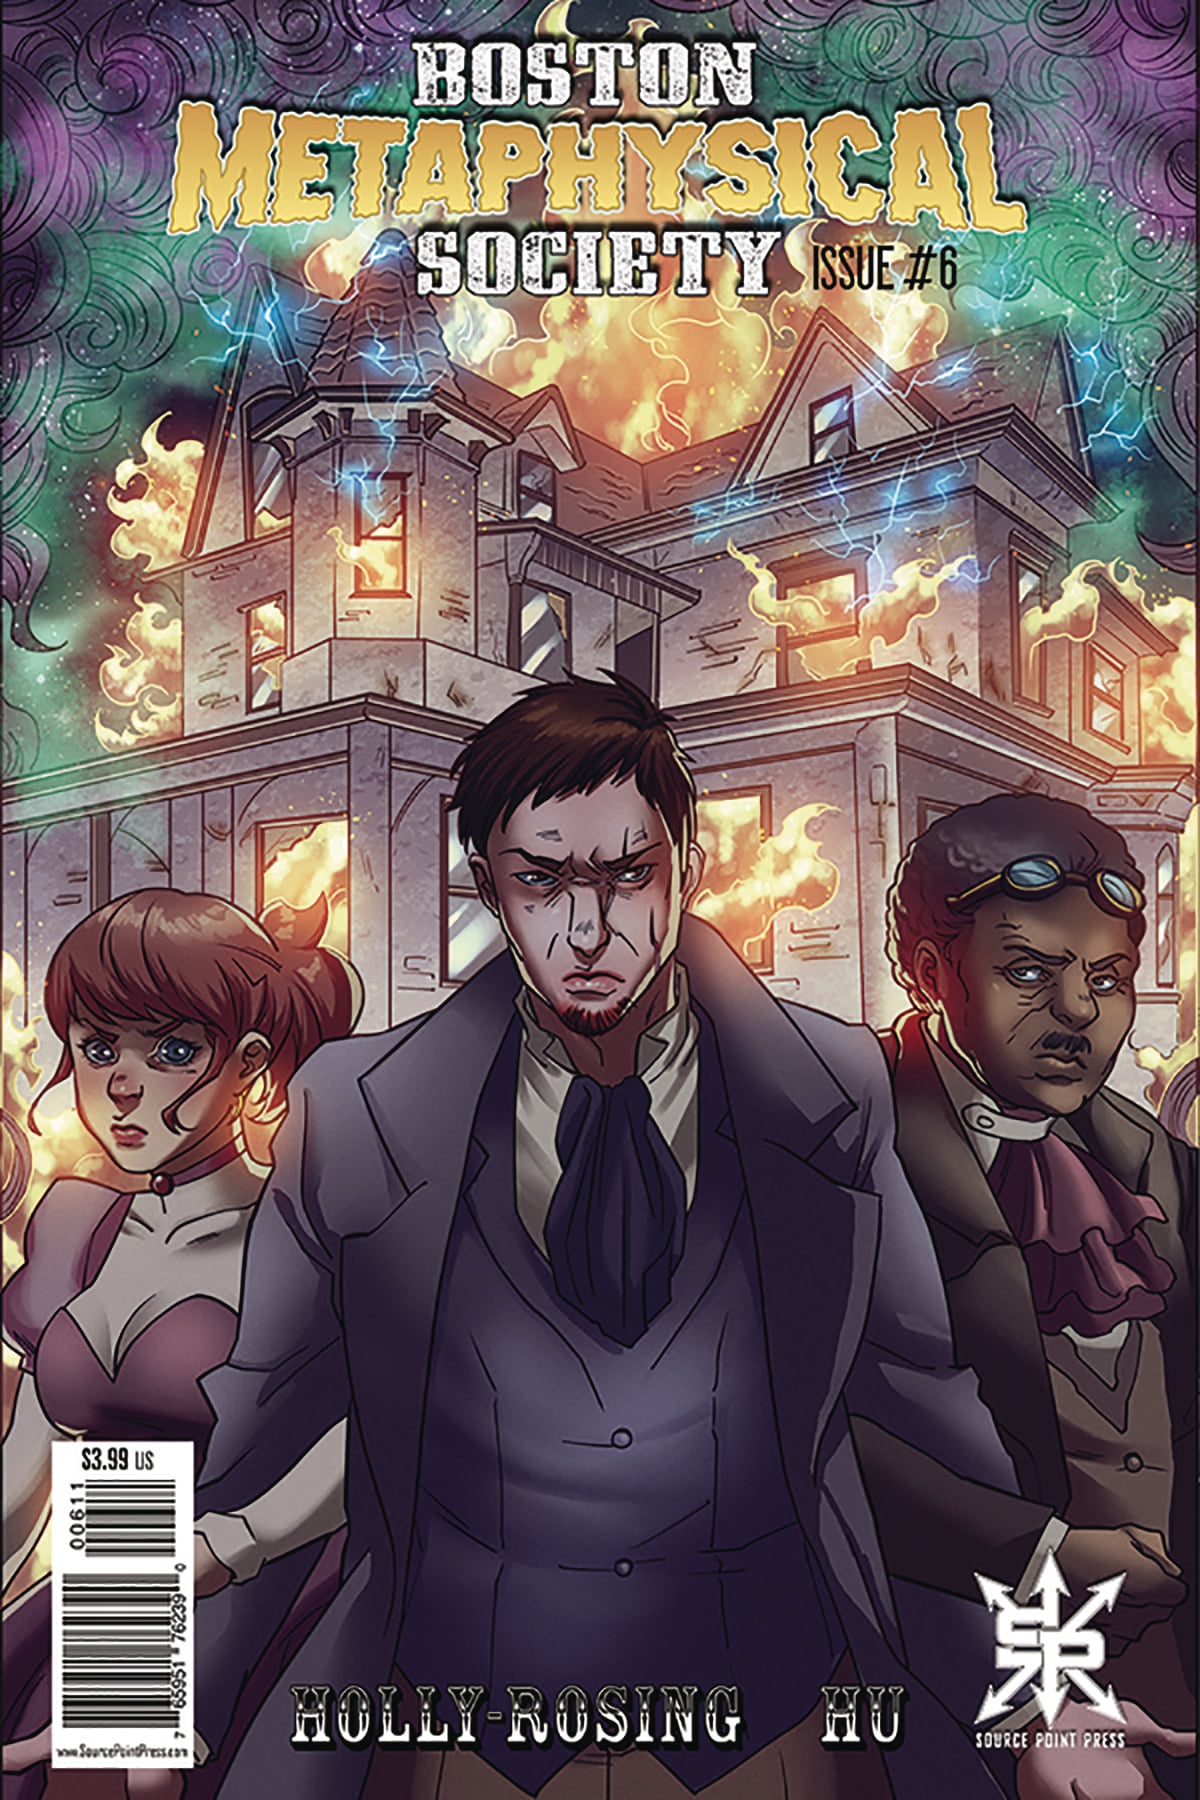 Boston Metaphysical Society #6 is Out Now, Float, Walk or Run to your Local Comic Book Store